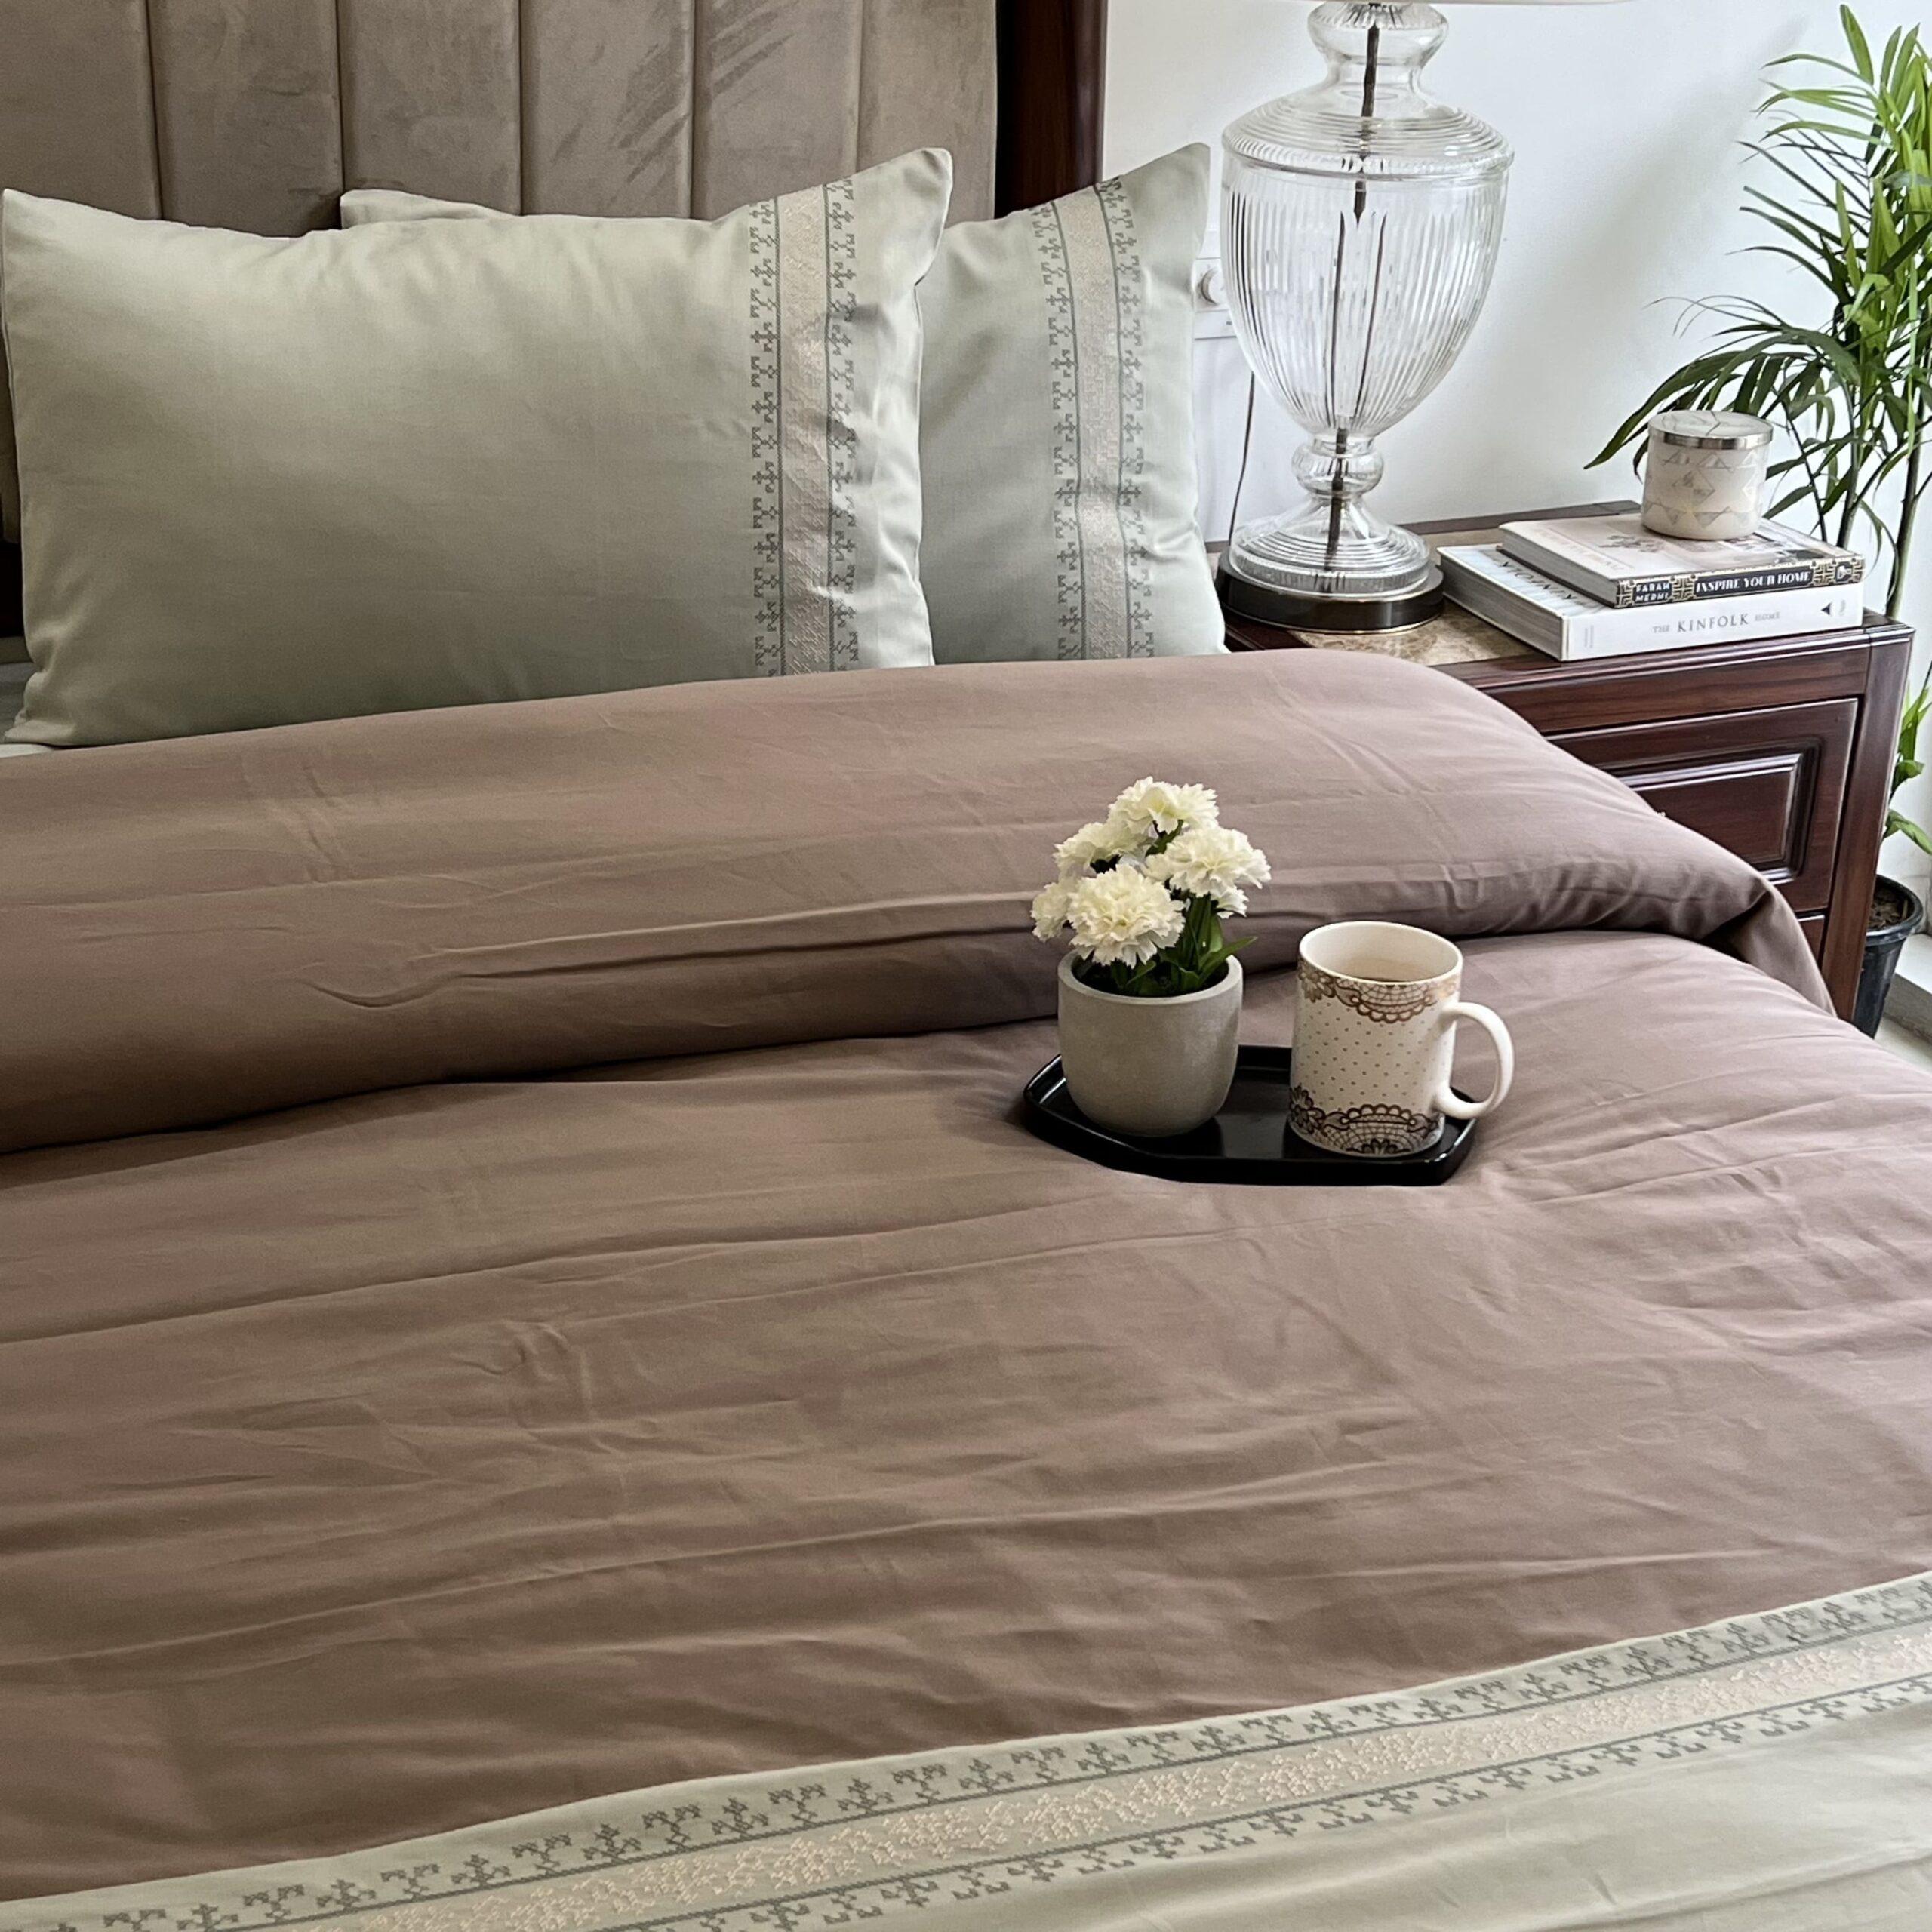 Delight Sage Green Taupe Dreams Duvet Cover